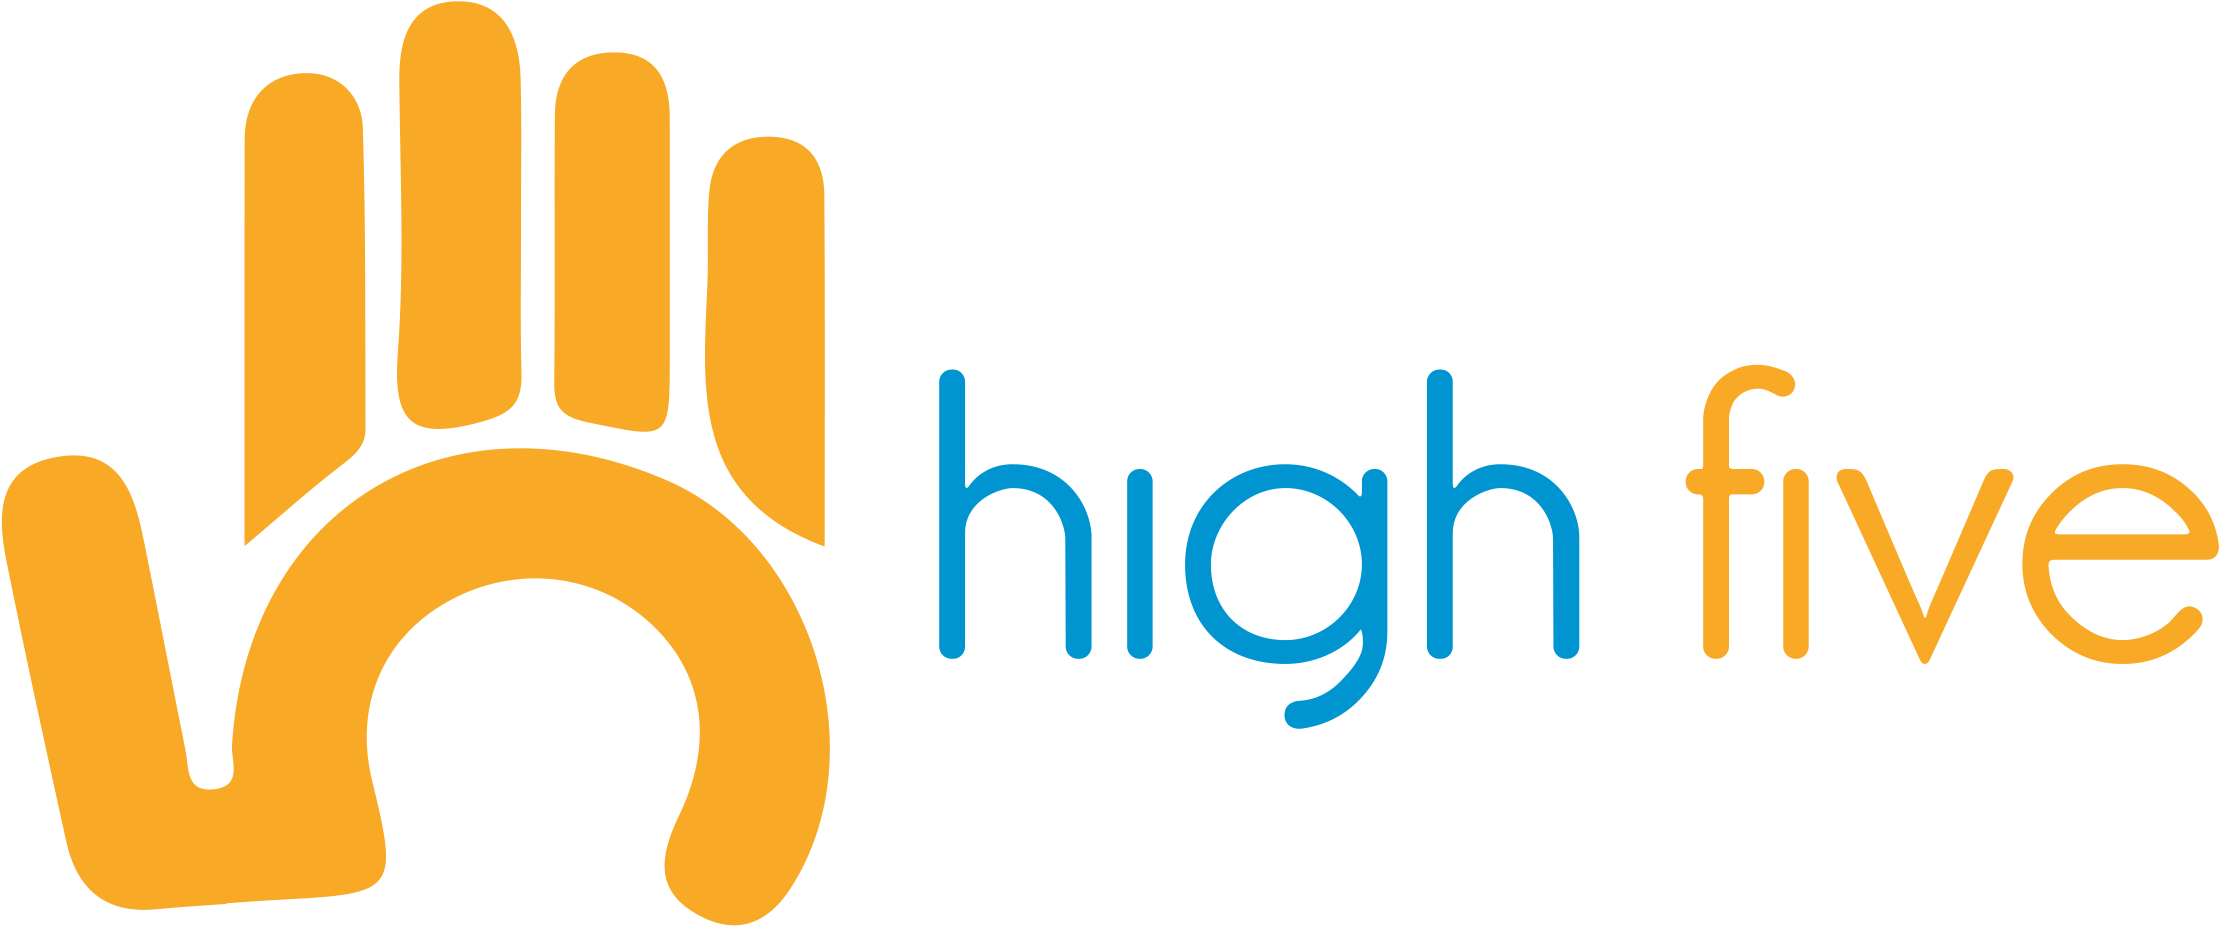 High Five - Hifive Png (2400x991)